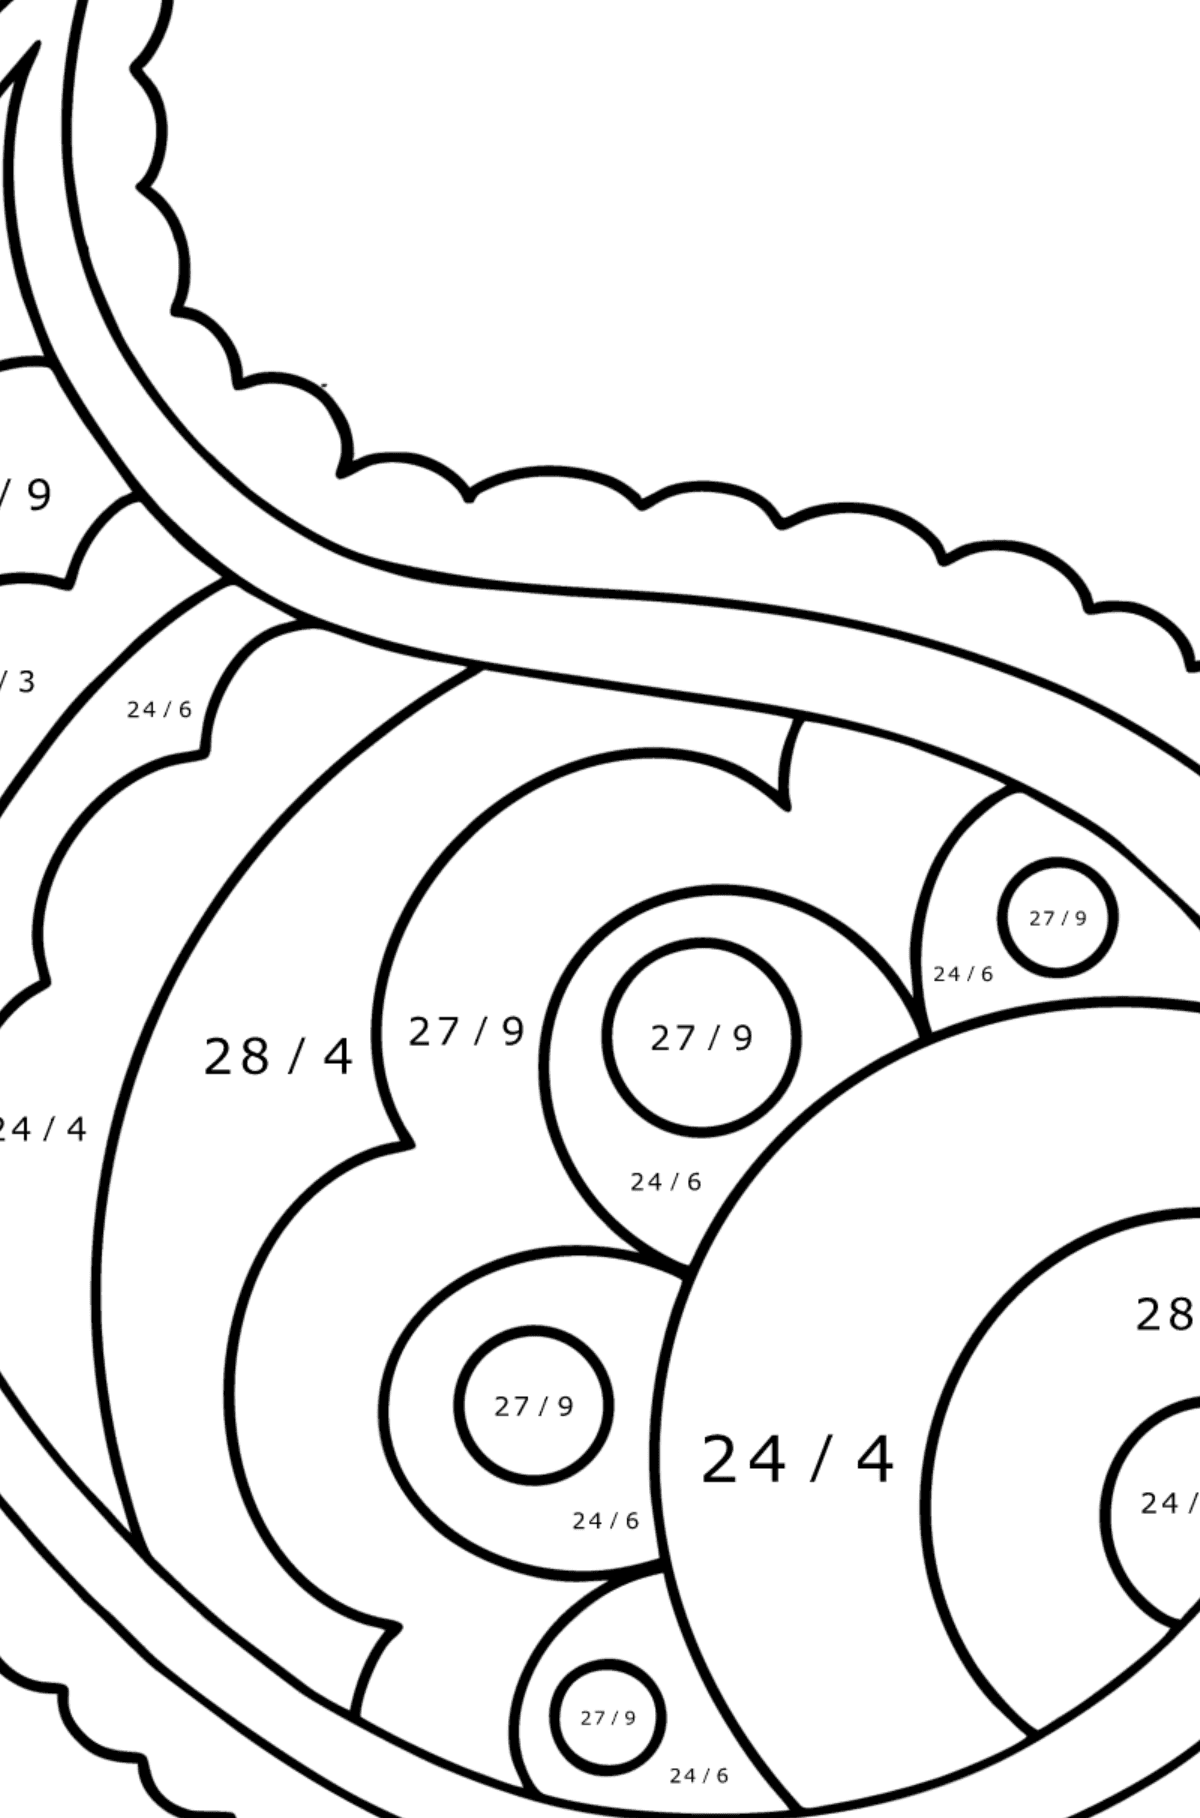 Paisley coloring page - 17 Elements - Math Coloring - Division for Kids